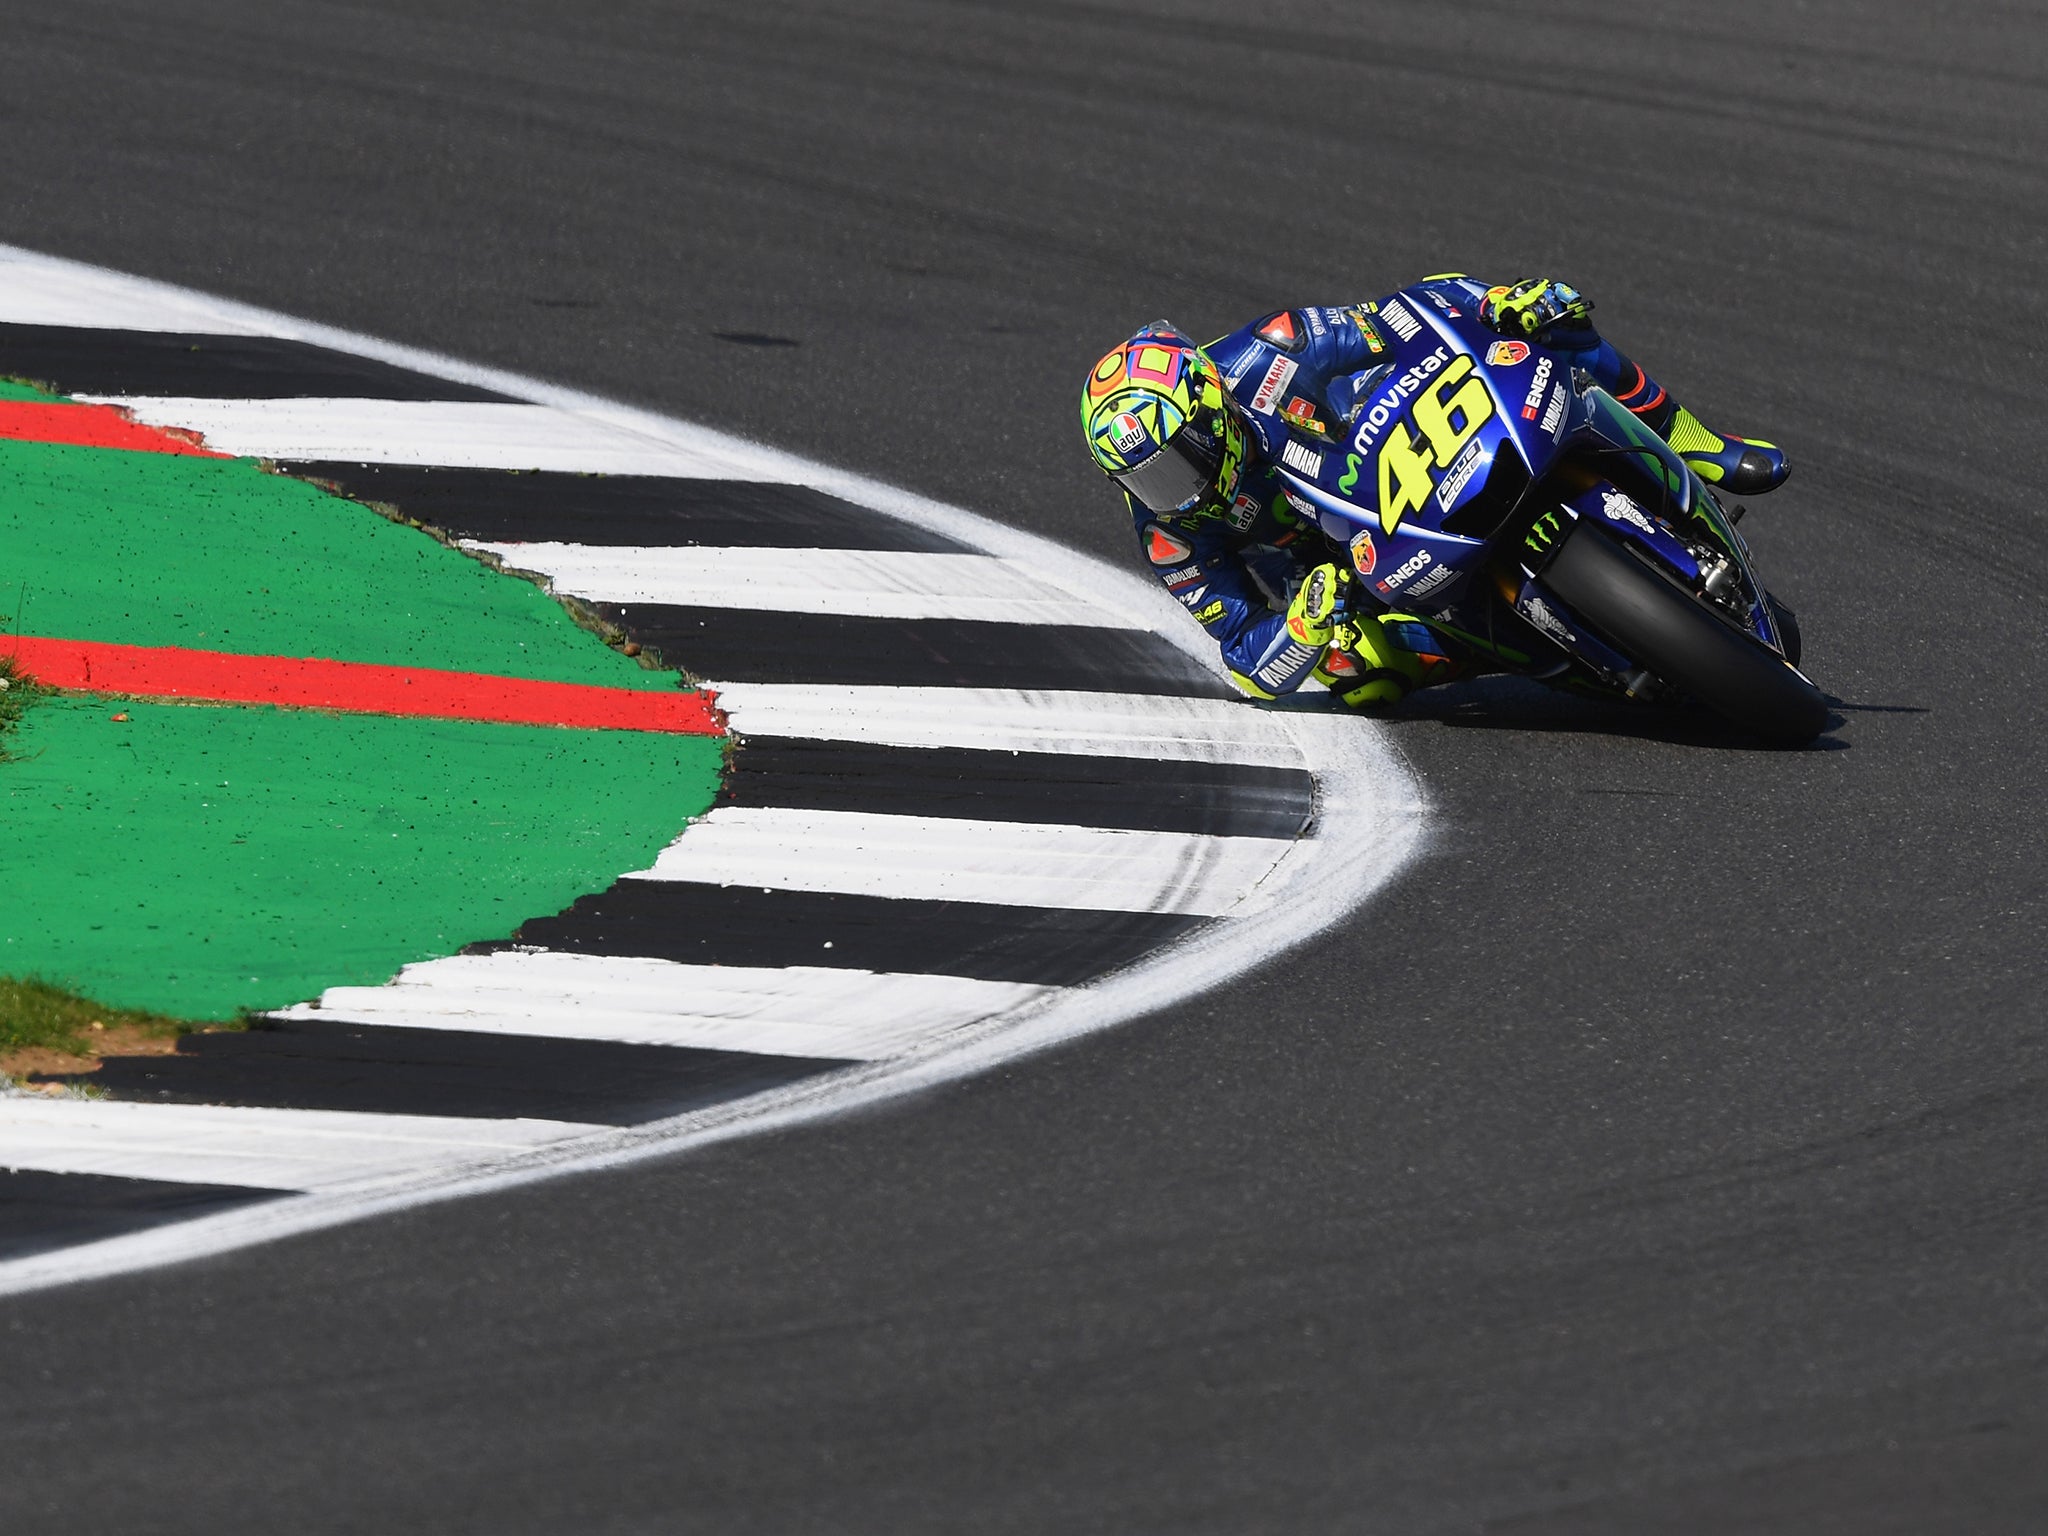 Valentino Rossi took part in testing at Misano ahead of a potential return from a broken leg this weekend